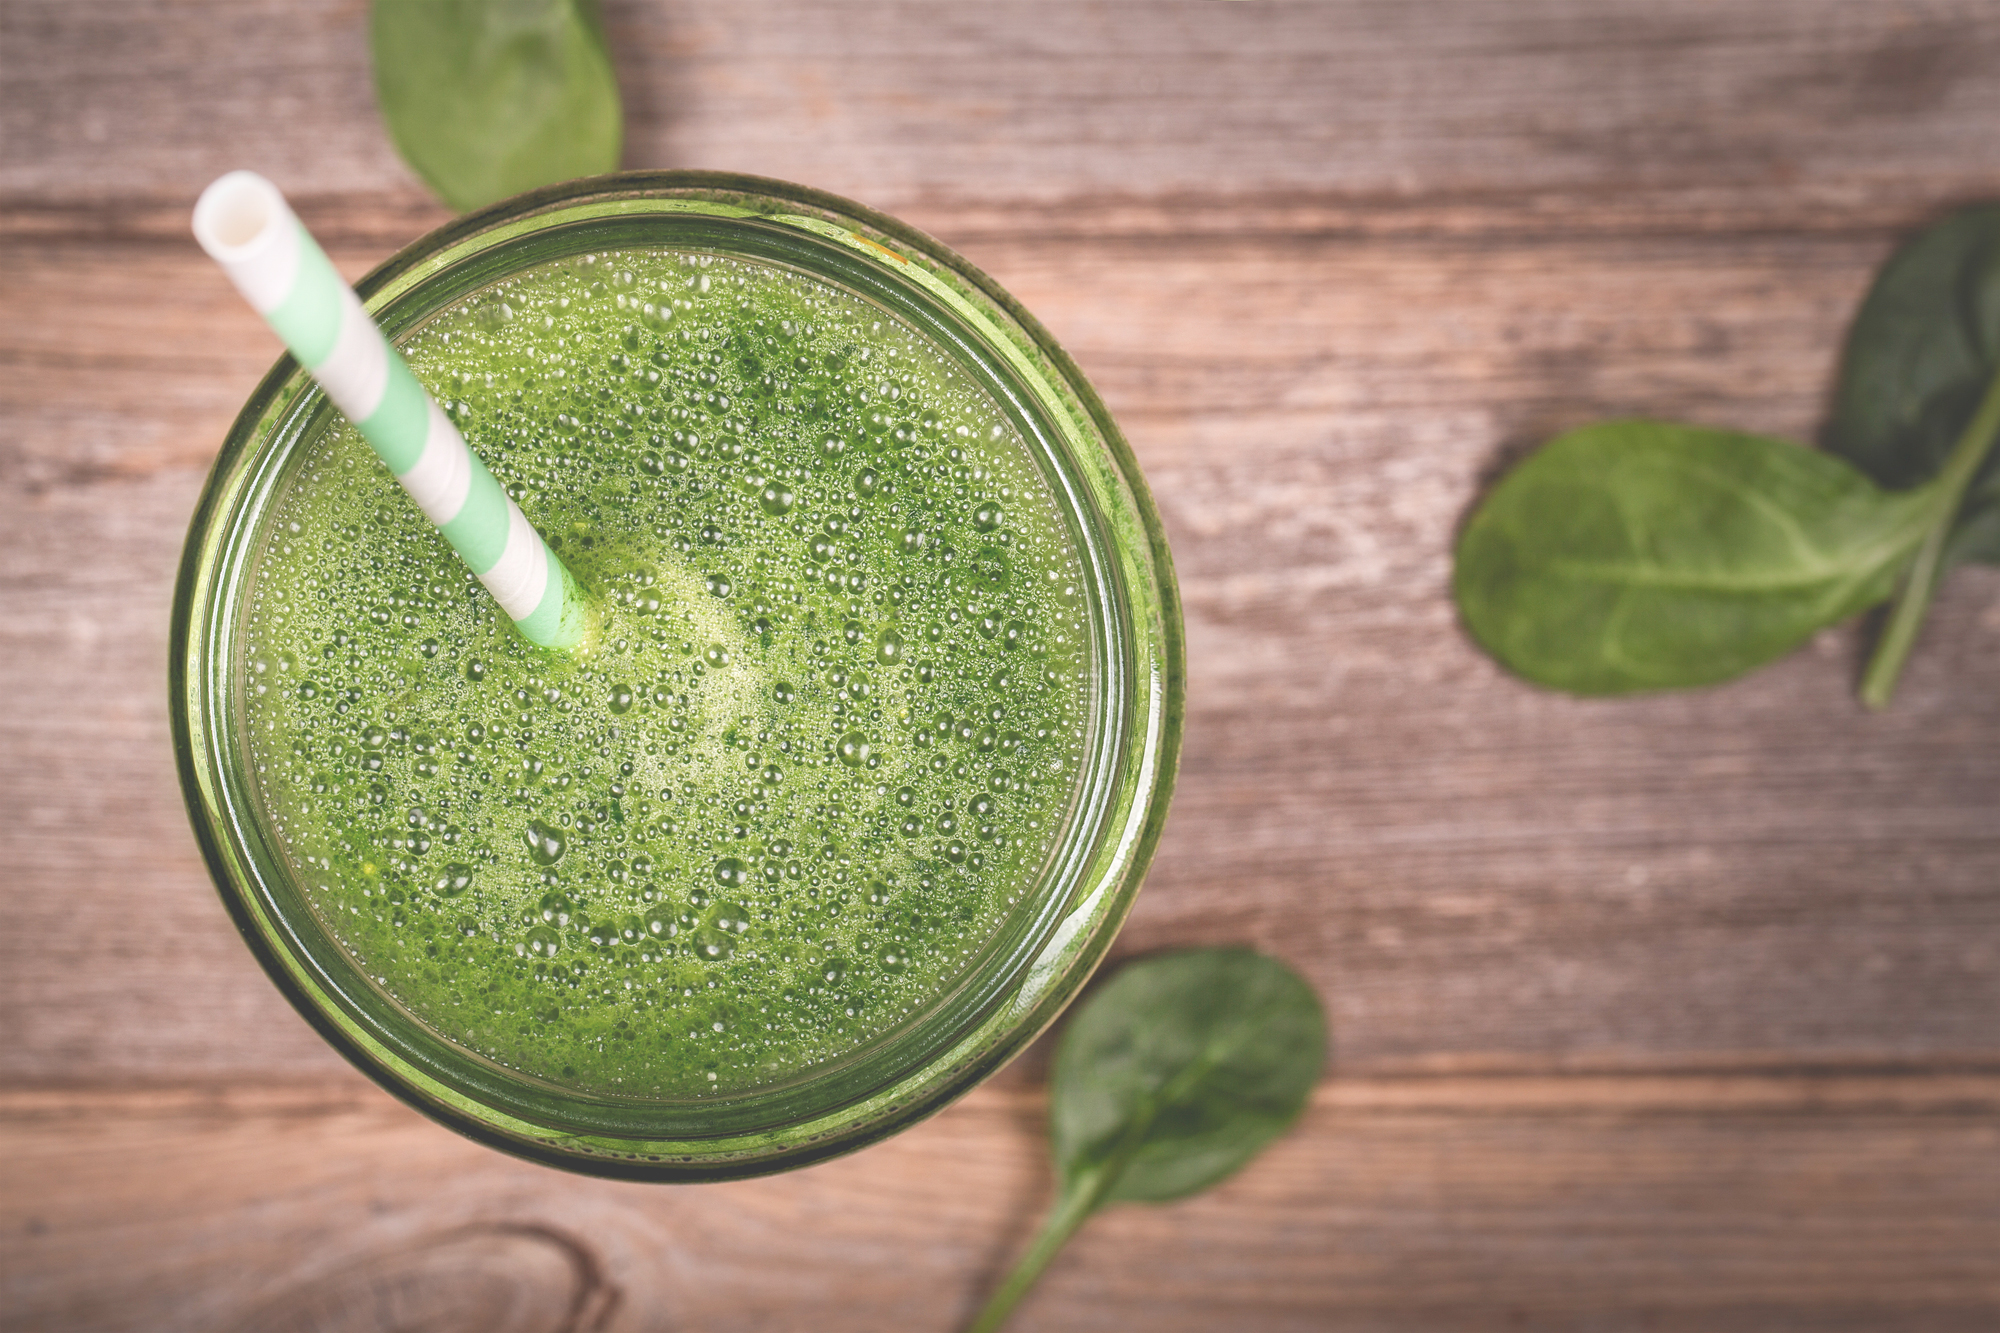 Learn more about thow juicing really impacts our health.